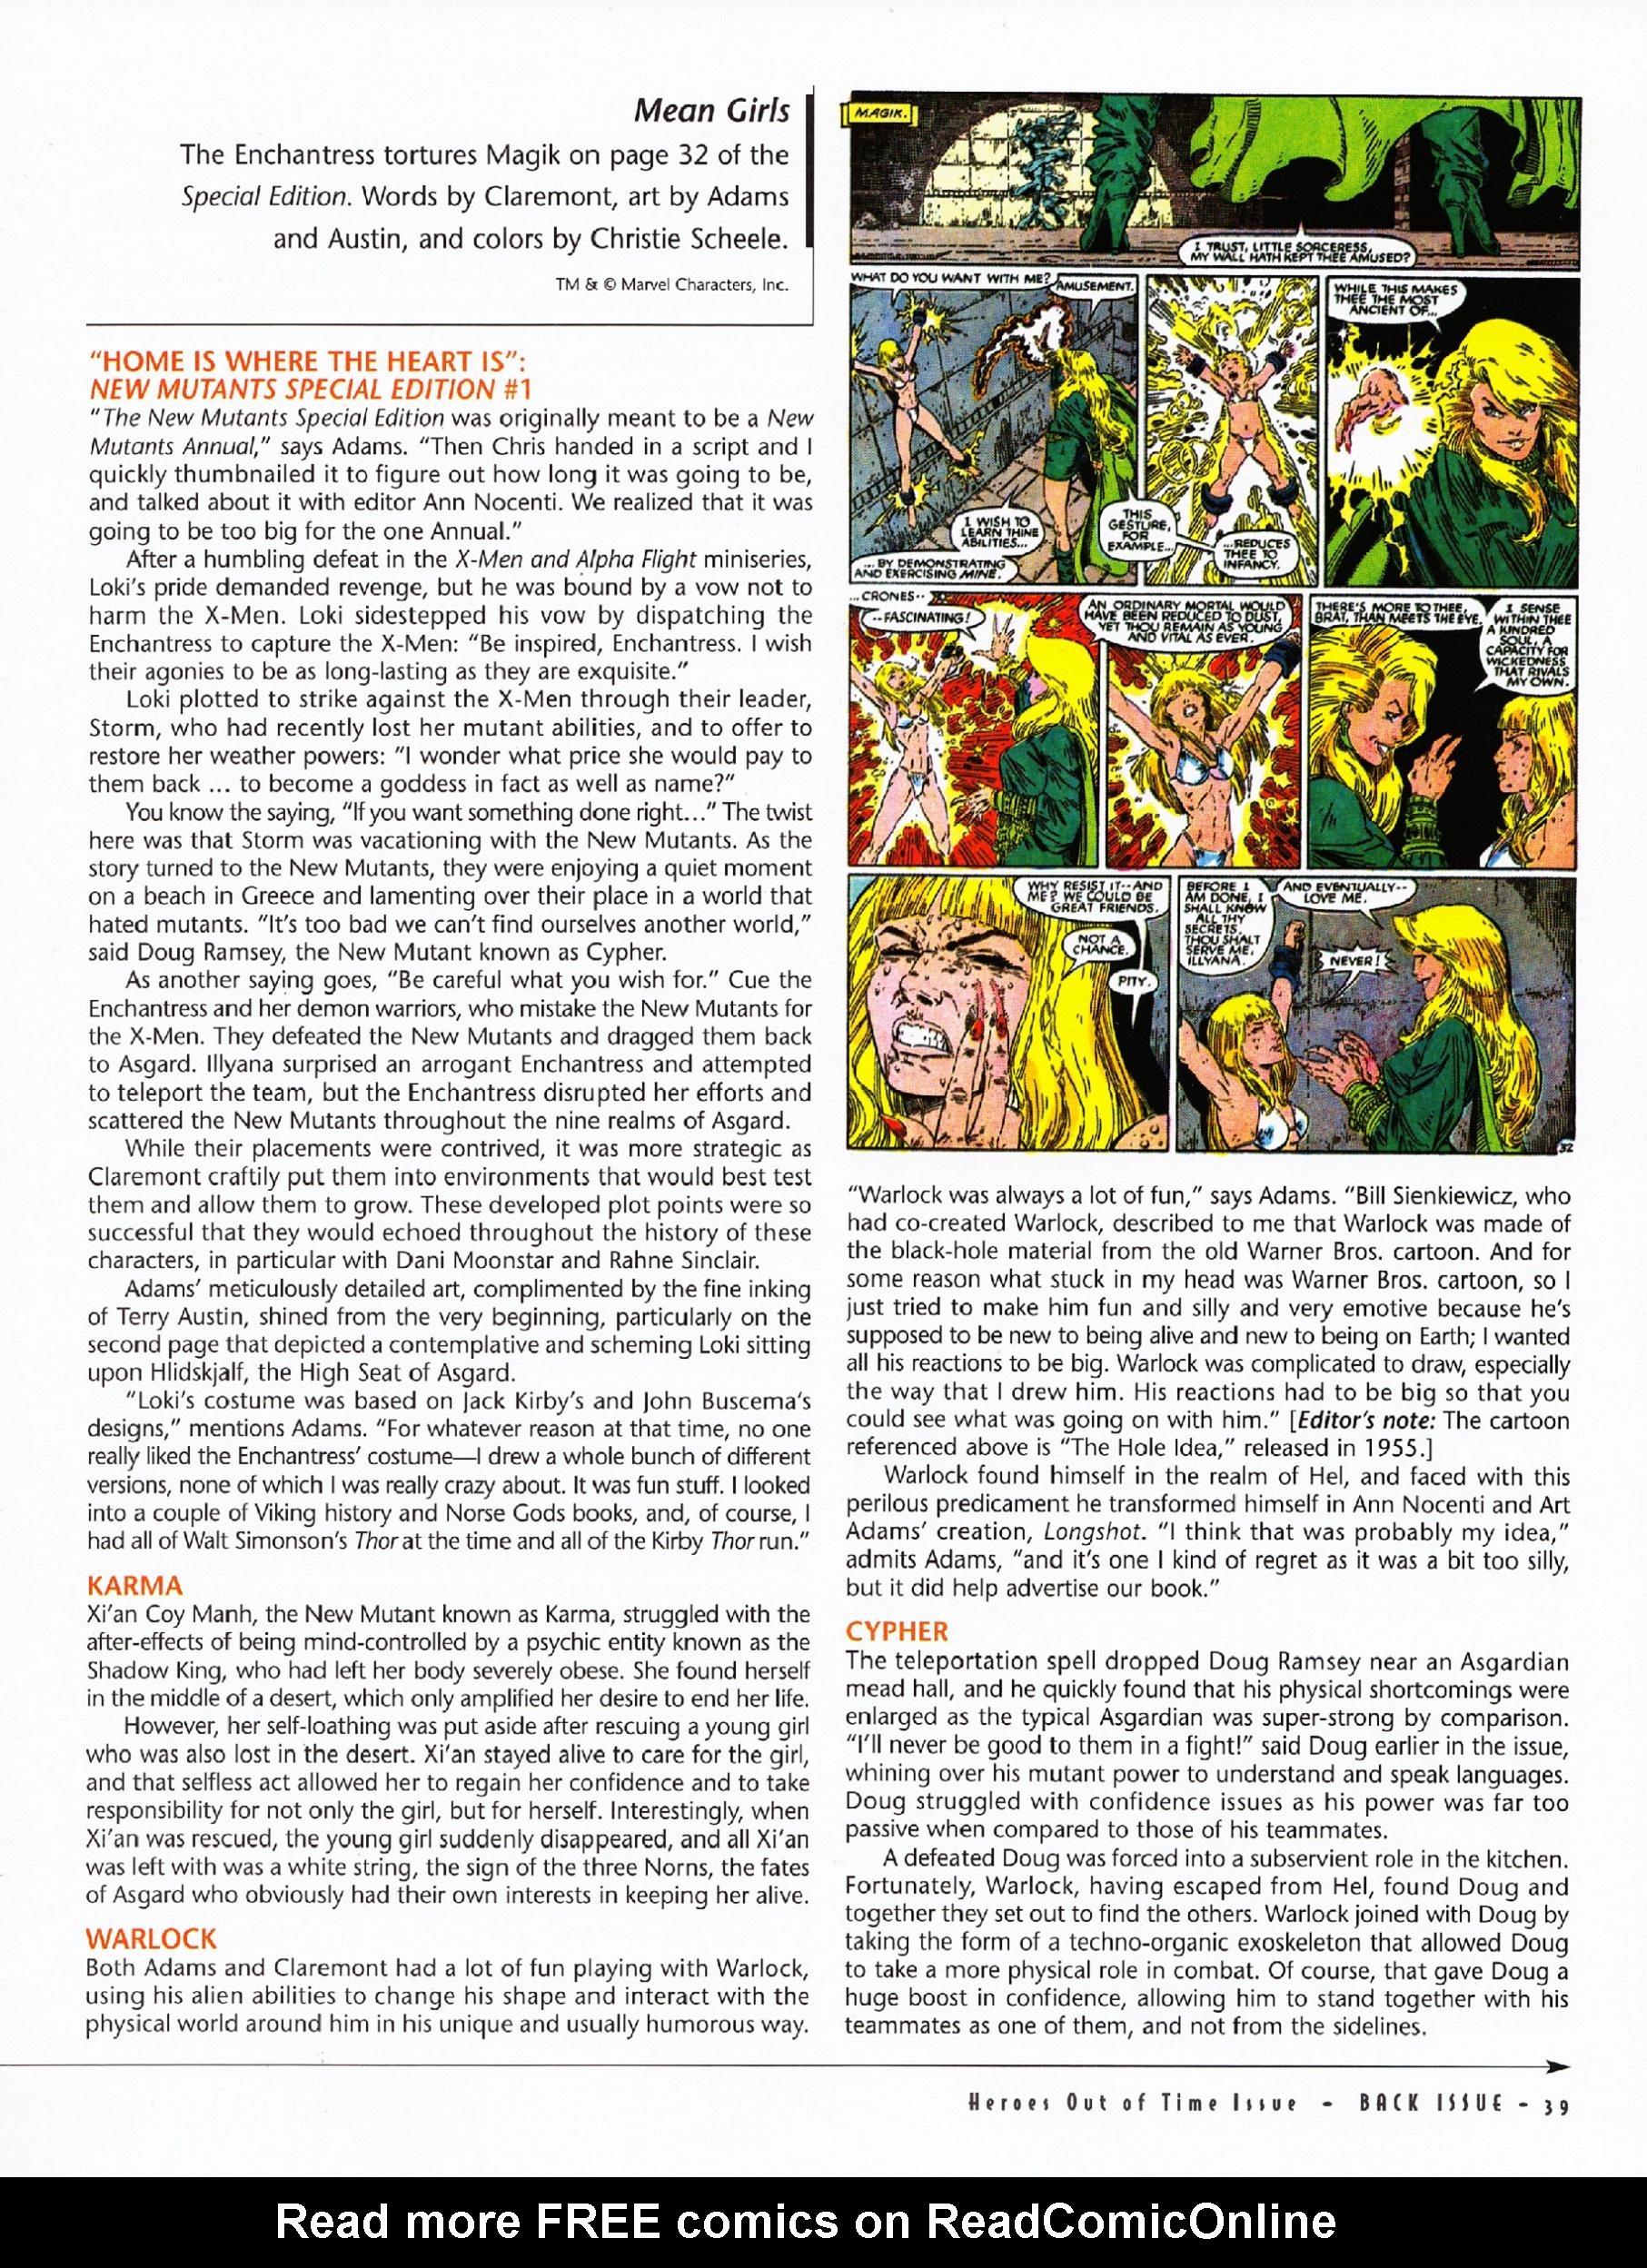 Read online Back Issue comic -  Issue #67 - 41